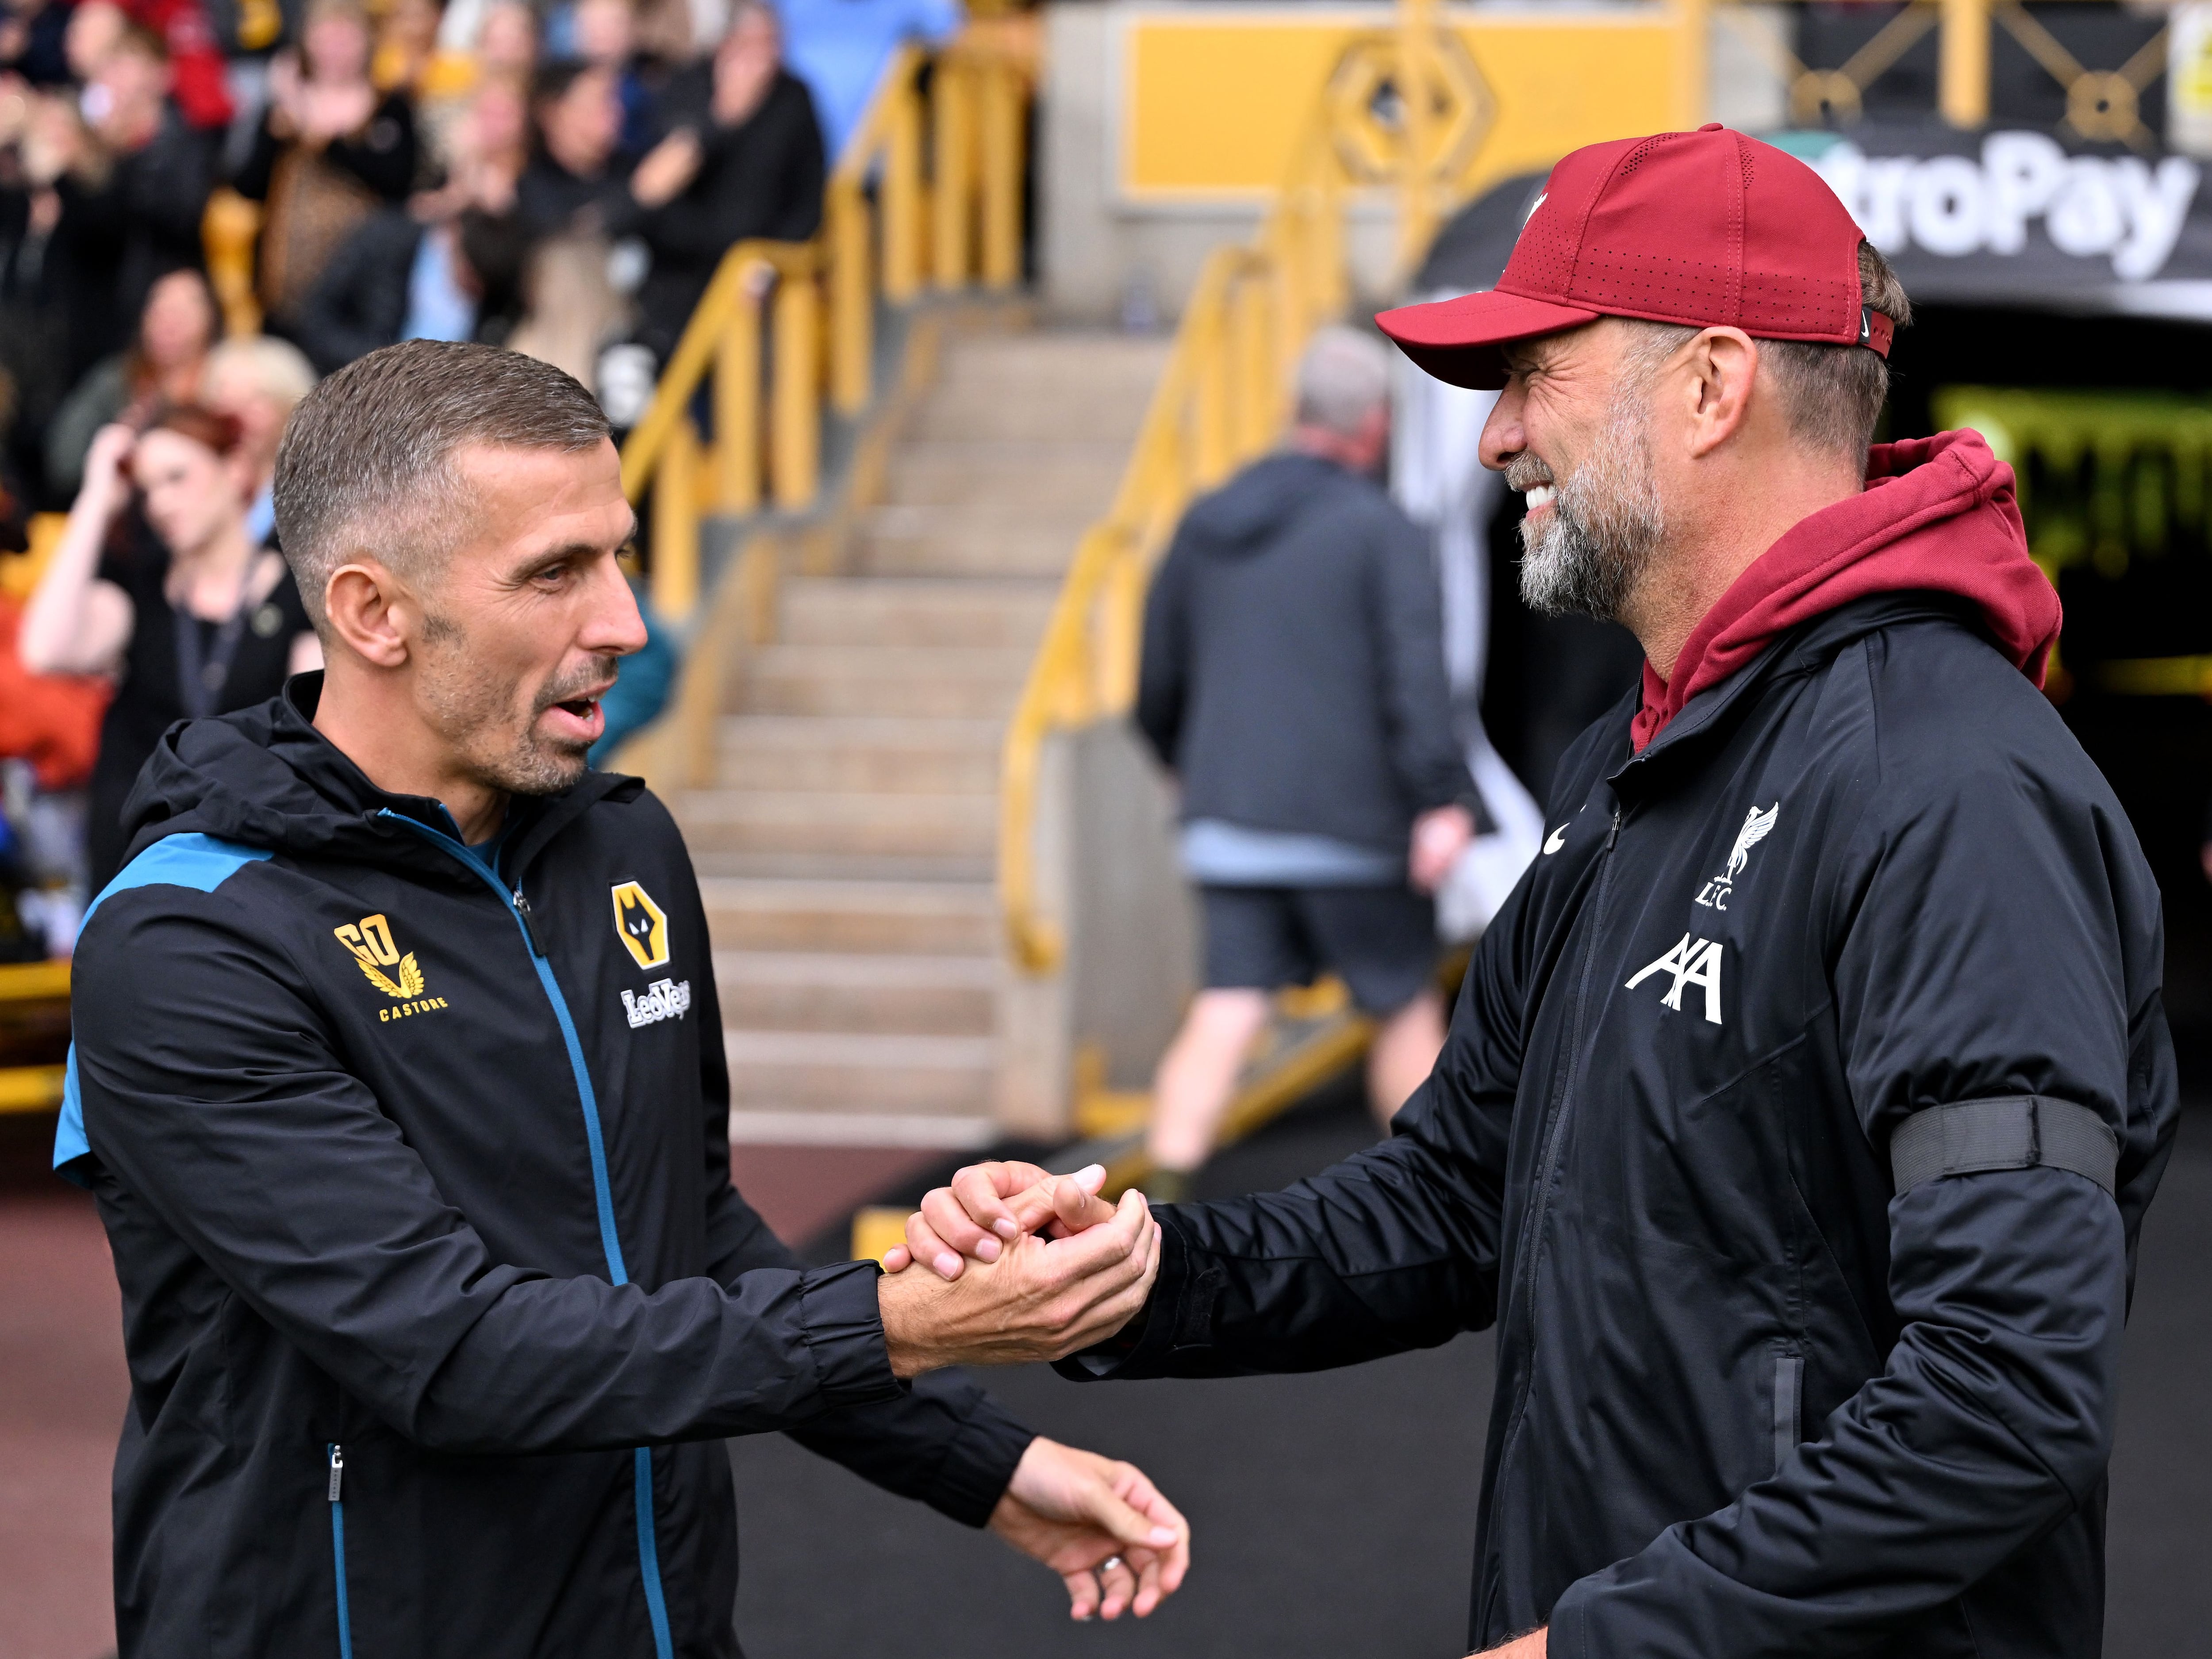 Liverpool v Wolves preview: Gary O’Neil salutes ‘icon’ Jurgen Klopp but wants to ruin farewell